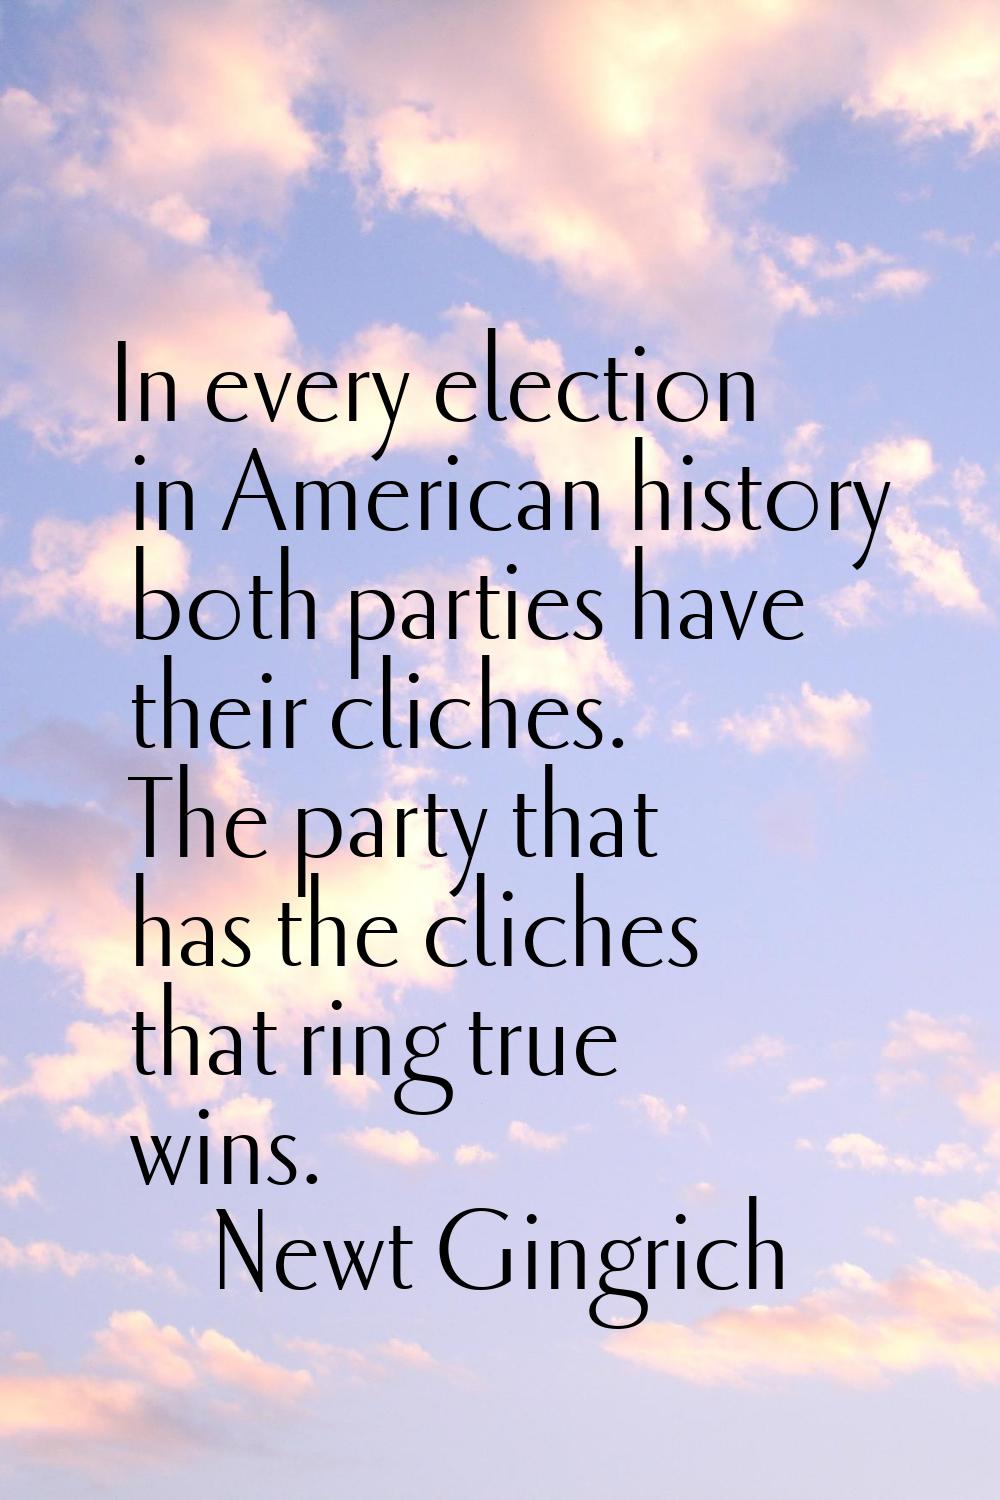 In every election in American history both parties have their cliches. The party that has the clich